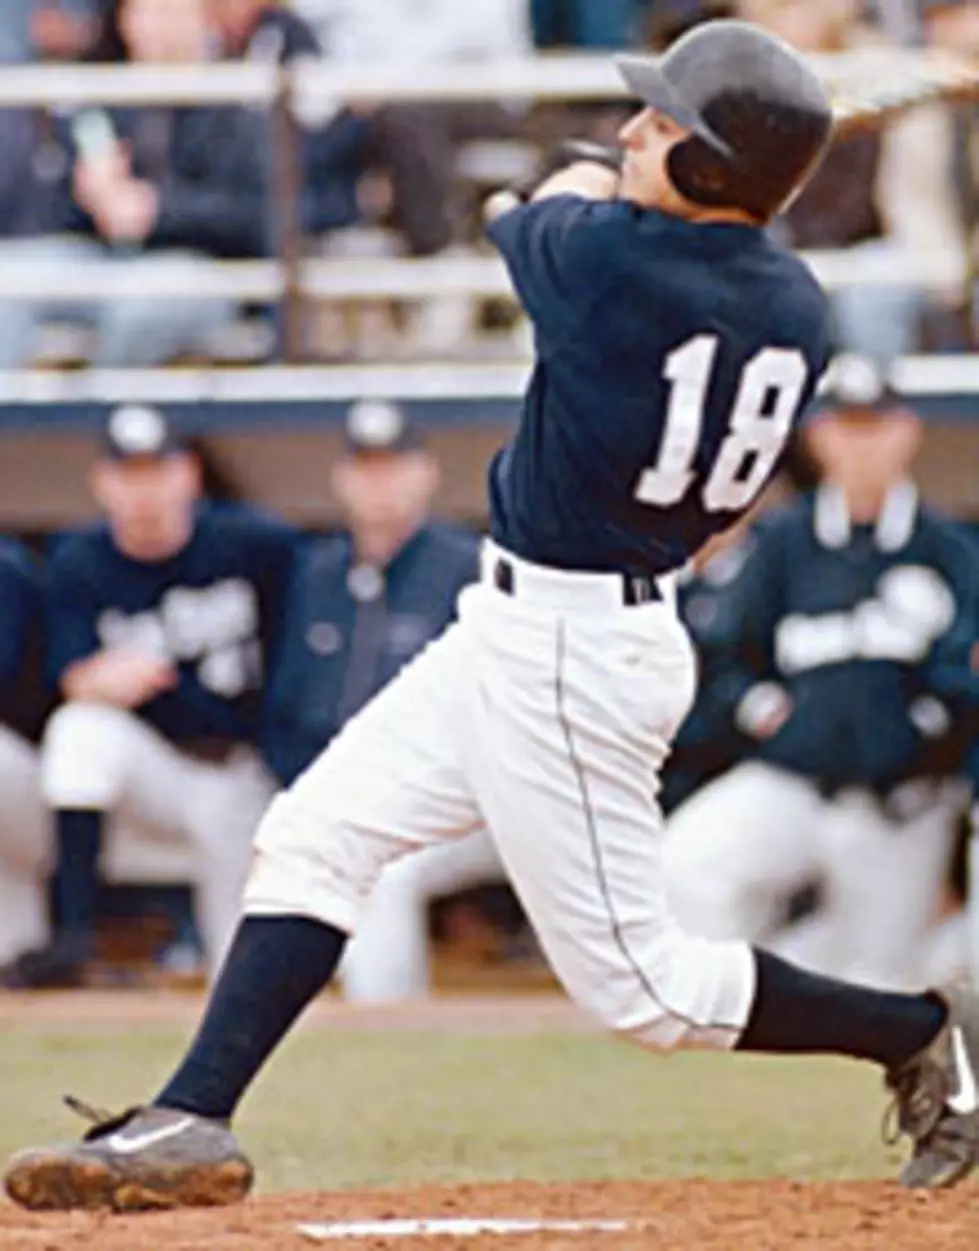 Absecon’s Mike Campo Named to Penn States All-Time Baseball Team